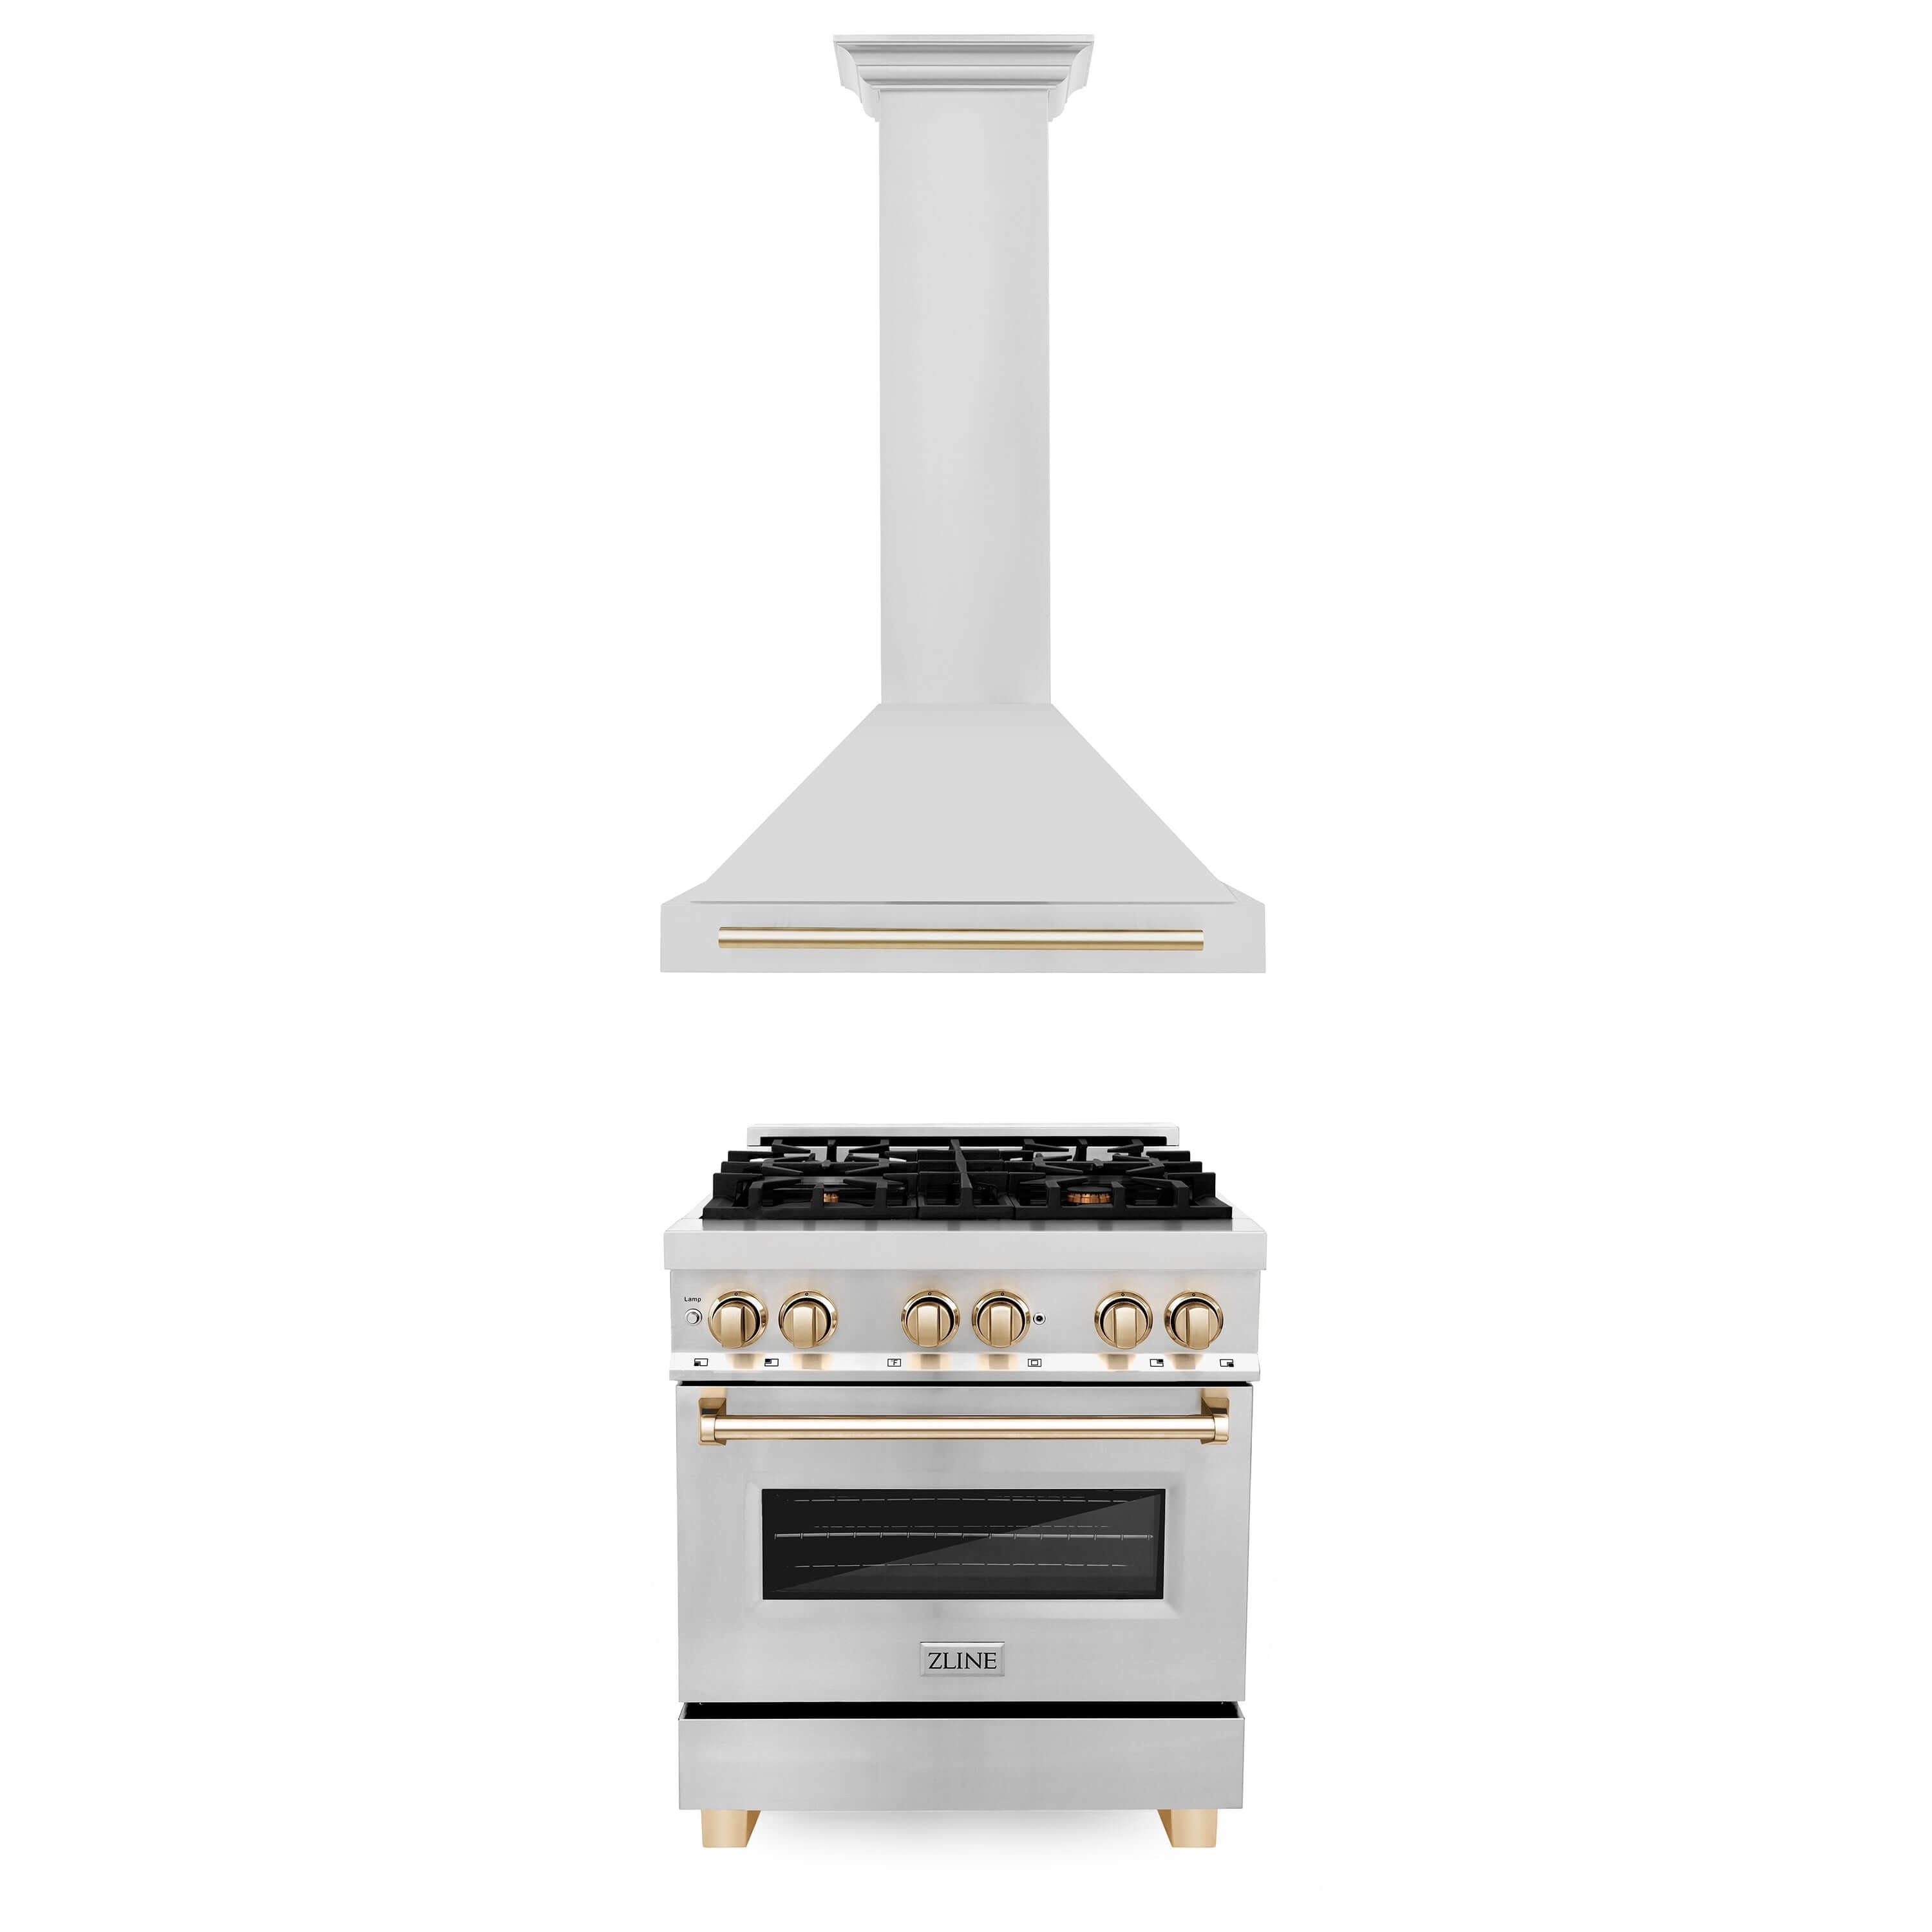 ZLINE 30 in. Autograph Edition 2 Piece Kitchen Appliance Package includes Stainless Steel Dual Fuel Range and Range Hood with Gold Accents (2AKP-RARH30-G)